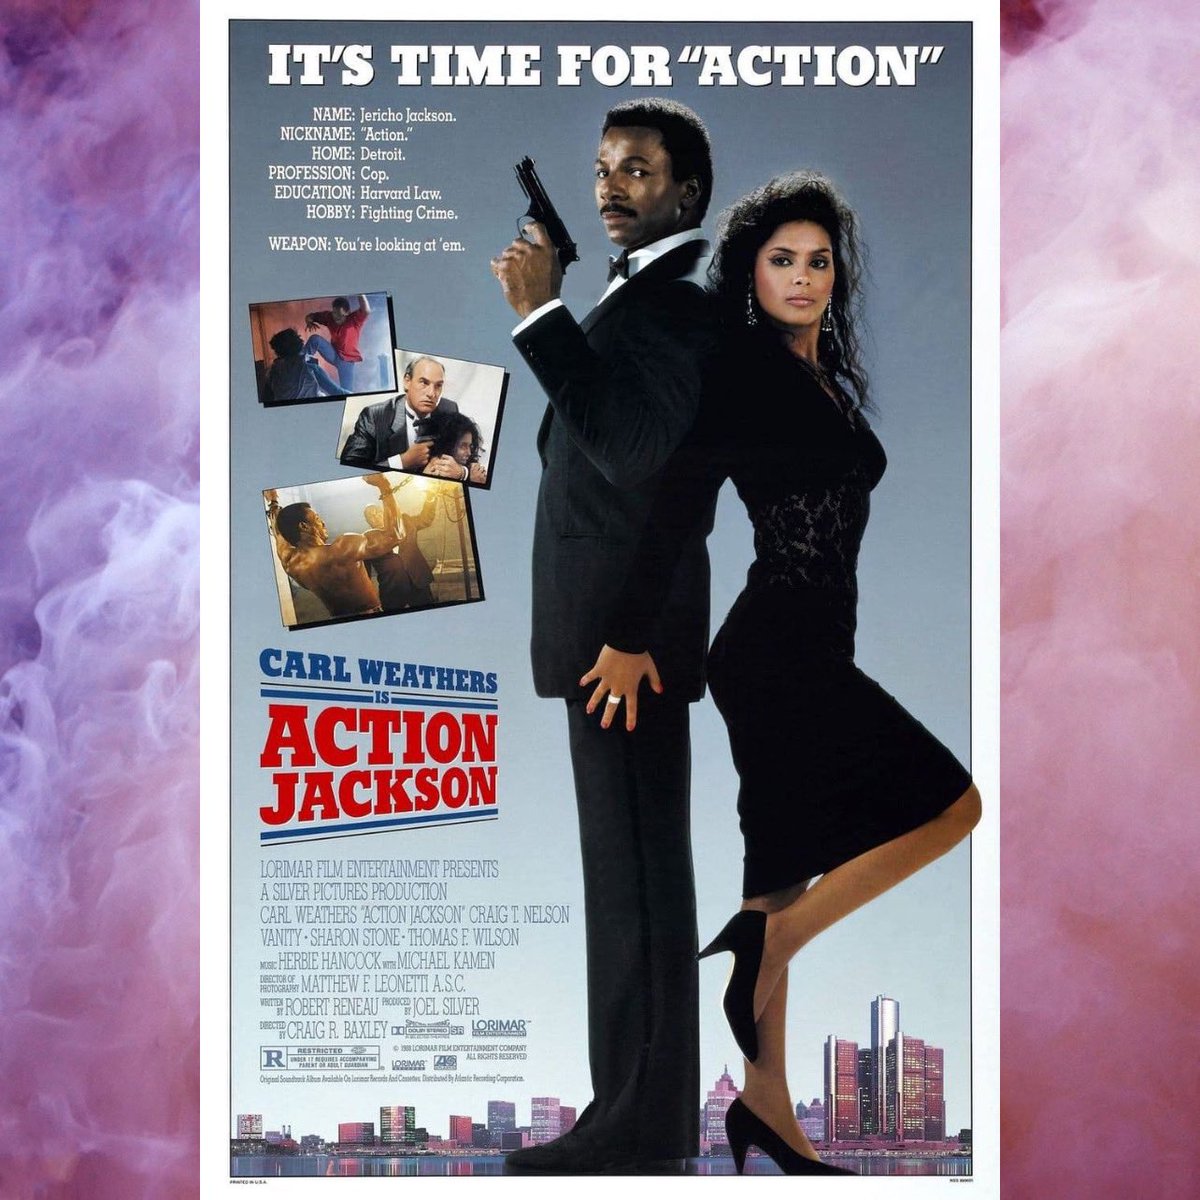 OUT NOW! COULD’VE BEEN A CANNON: ACTION JACKSON! 

It's got Vanity, Coach and pretty much every stunt guy from Die Hard. Enjoy!
“I expected a standing ovation.” “You’re getting one.”

#carlweathers #vanity #craigtnelson #thecannoncanon #couldvebeenacannon